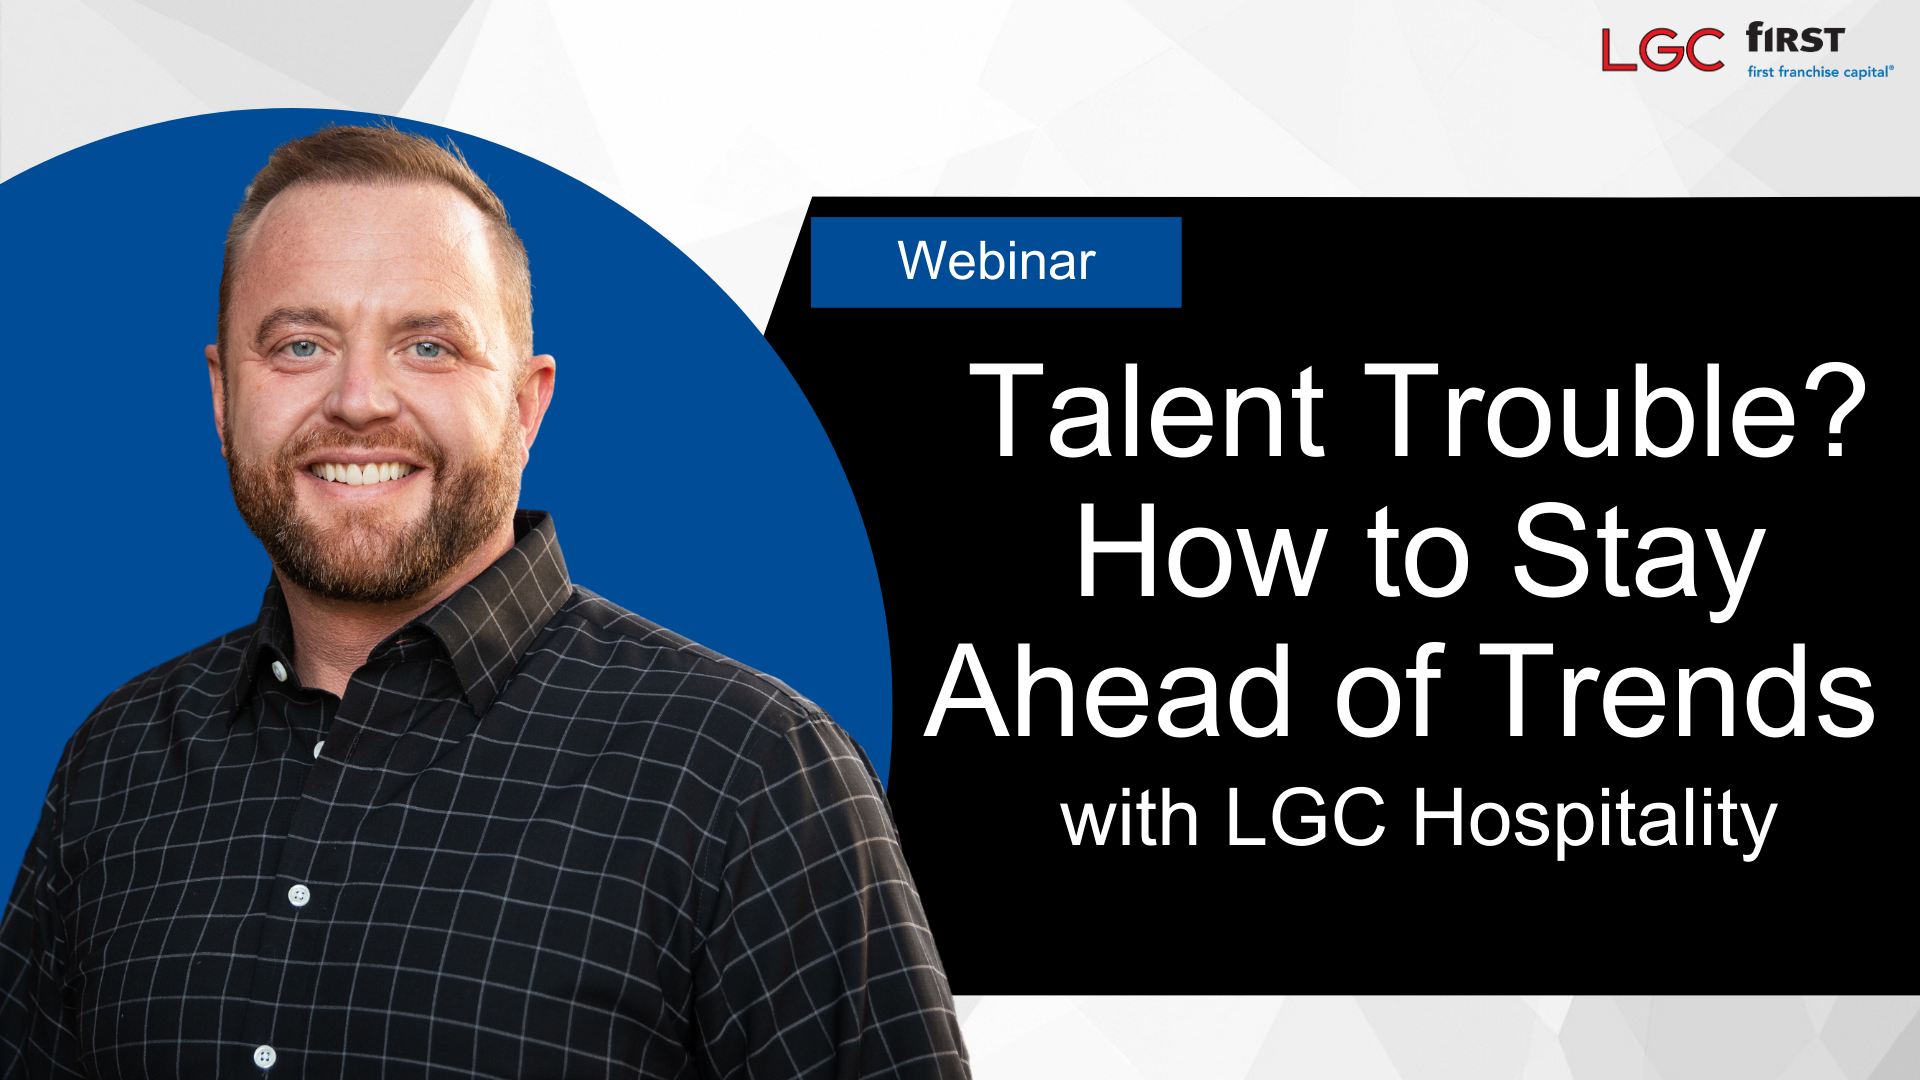 Talent Trouble? How to Stay Ahead of Trends with LGC Hospitality